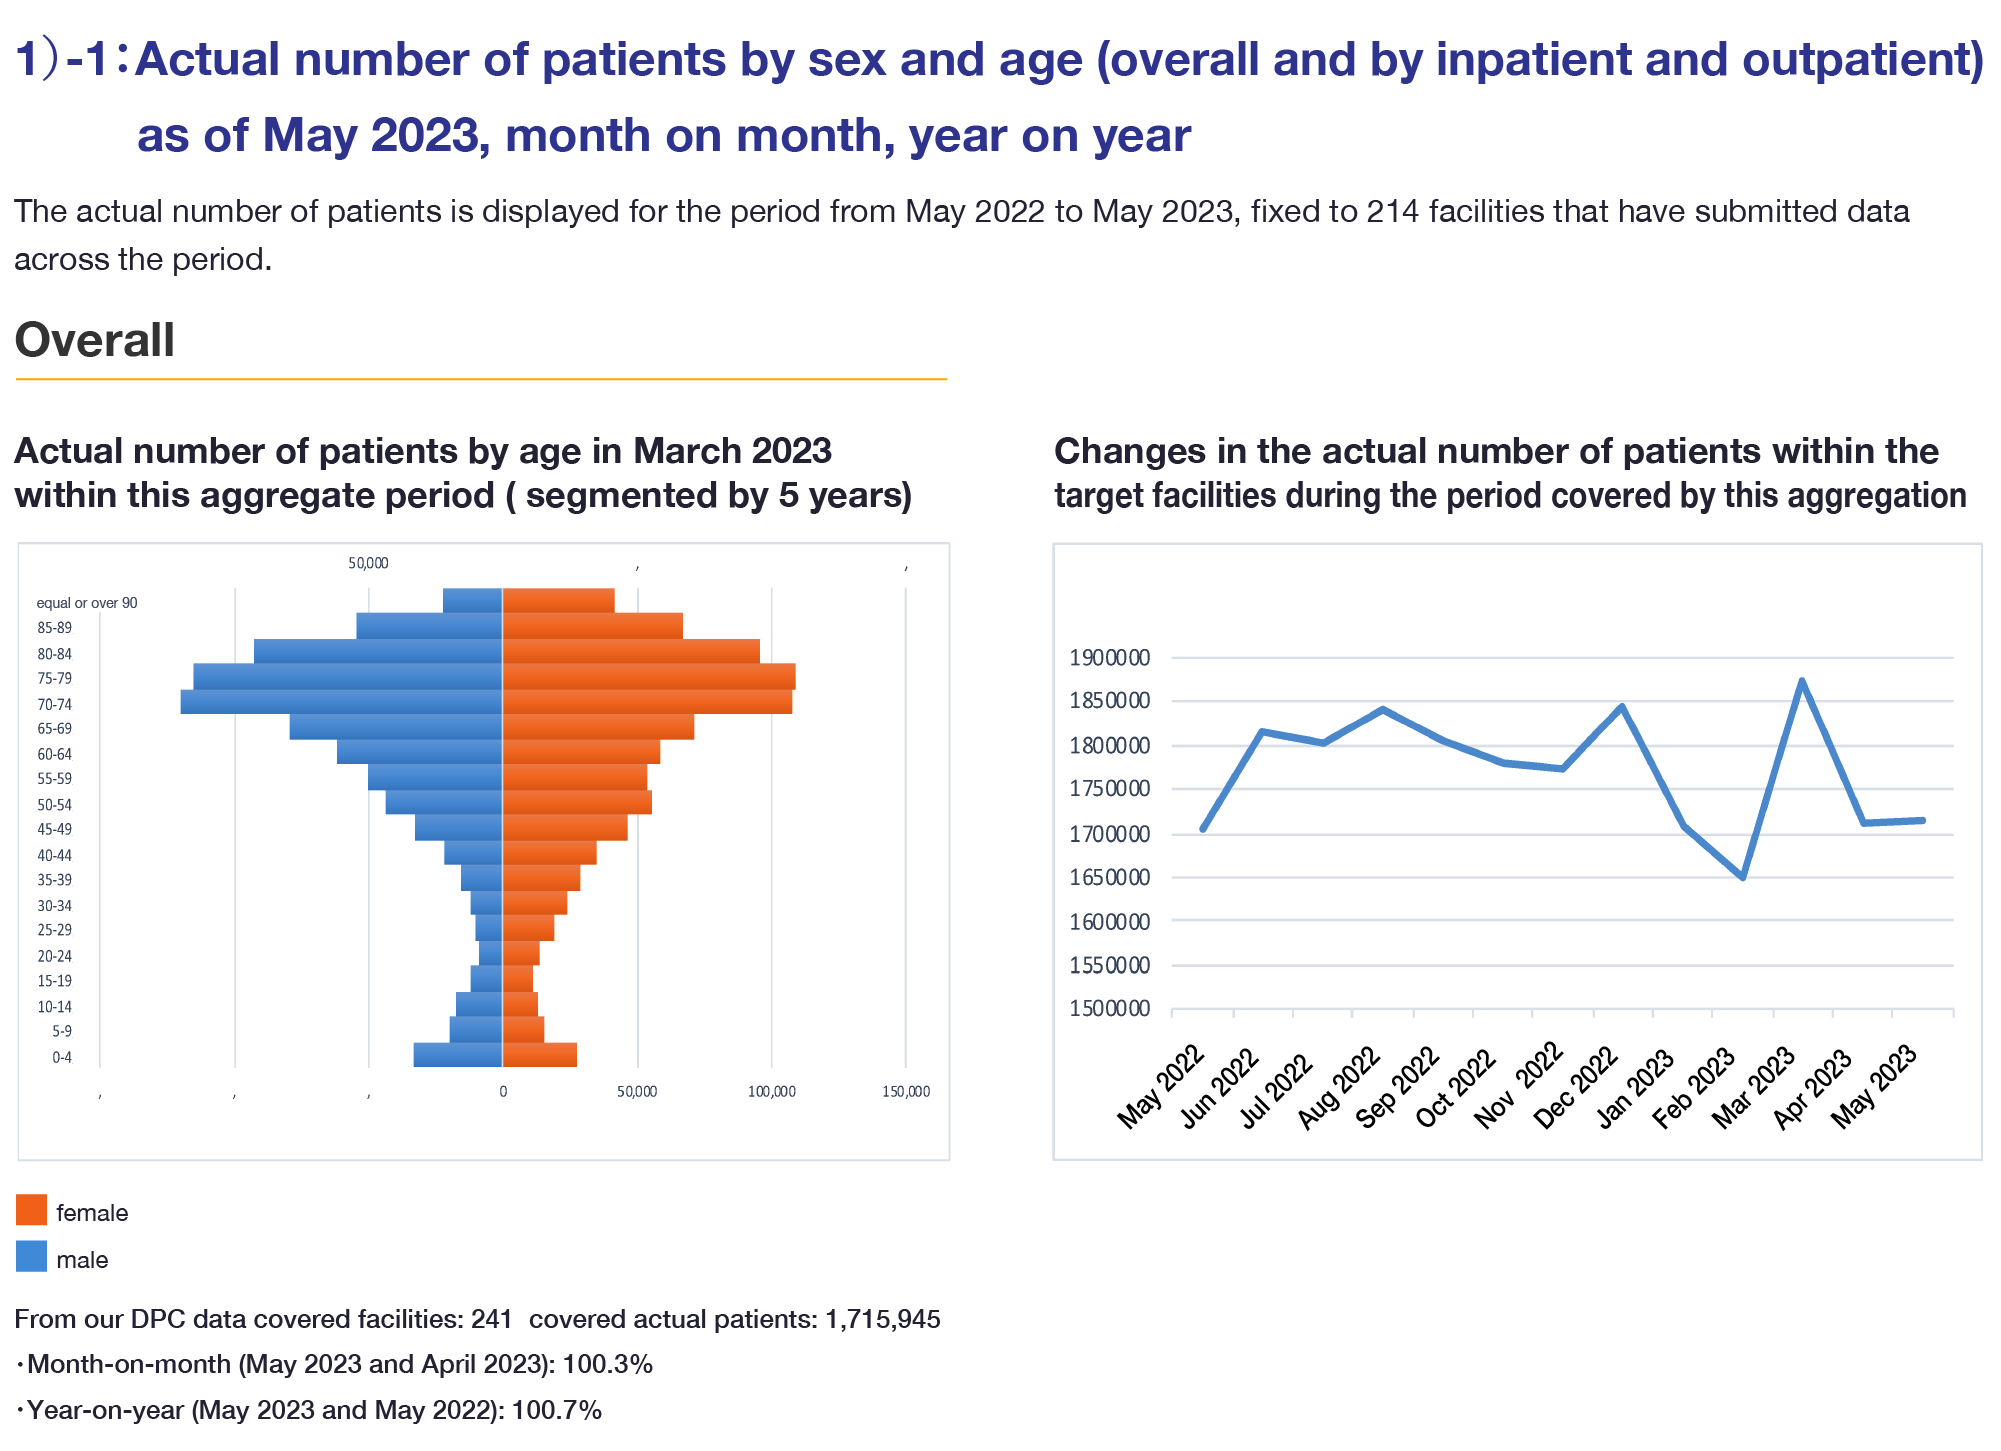 1)-1:Actual number of patients by sex and age(overall and by inpatient and outpatient) as of May 2023, month on month, year on year